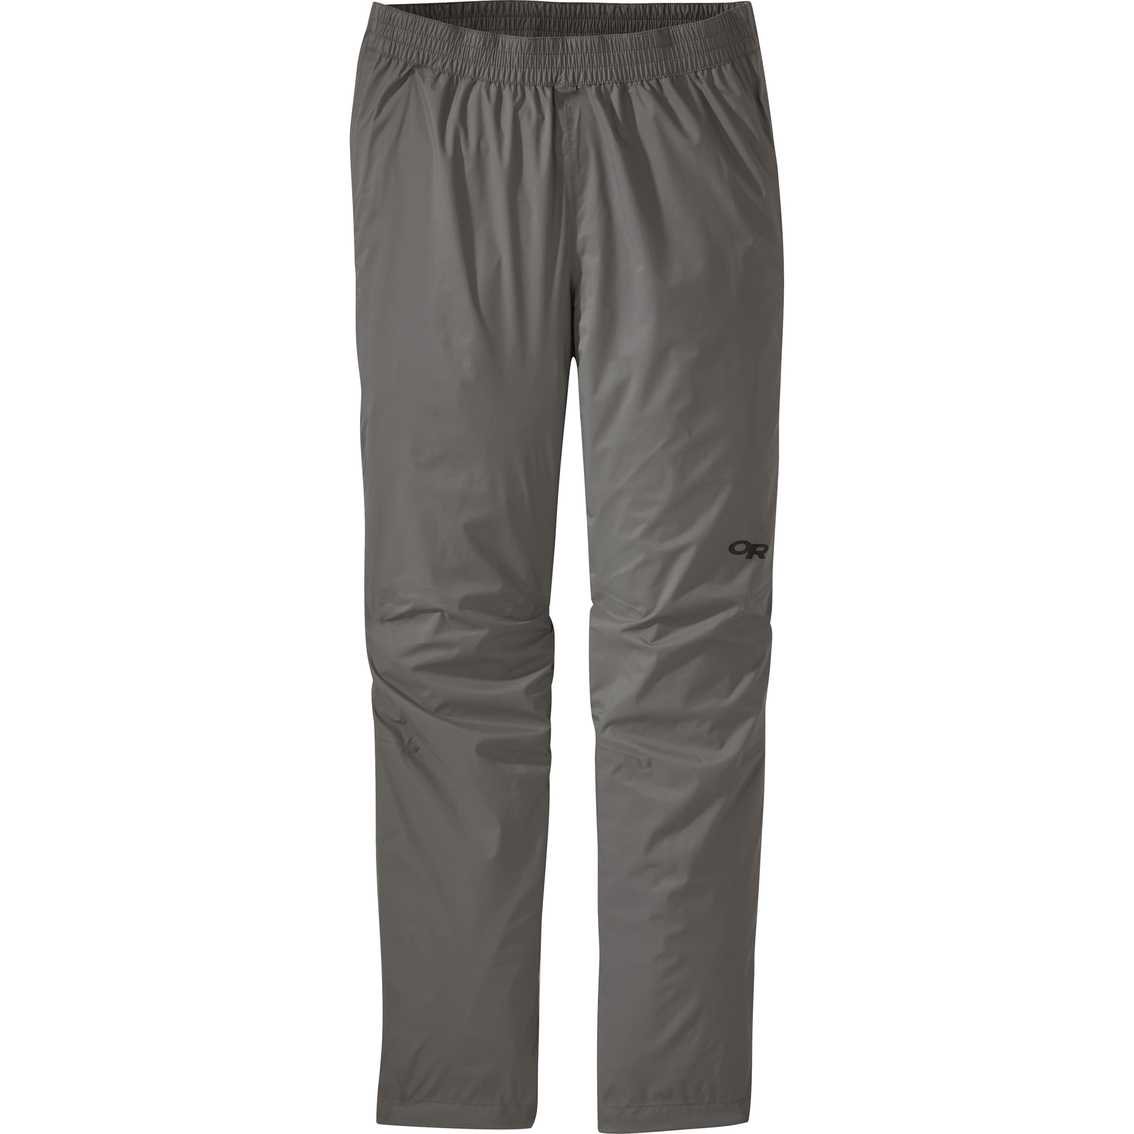 Outdoor Research Apollo Rain Pants | Pants | Clothing & Accessories ...